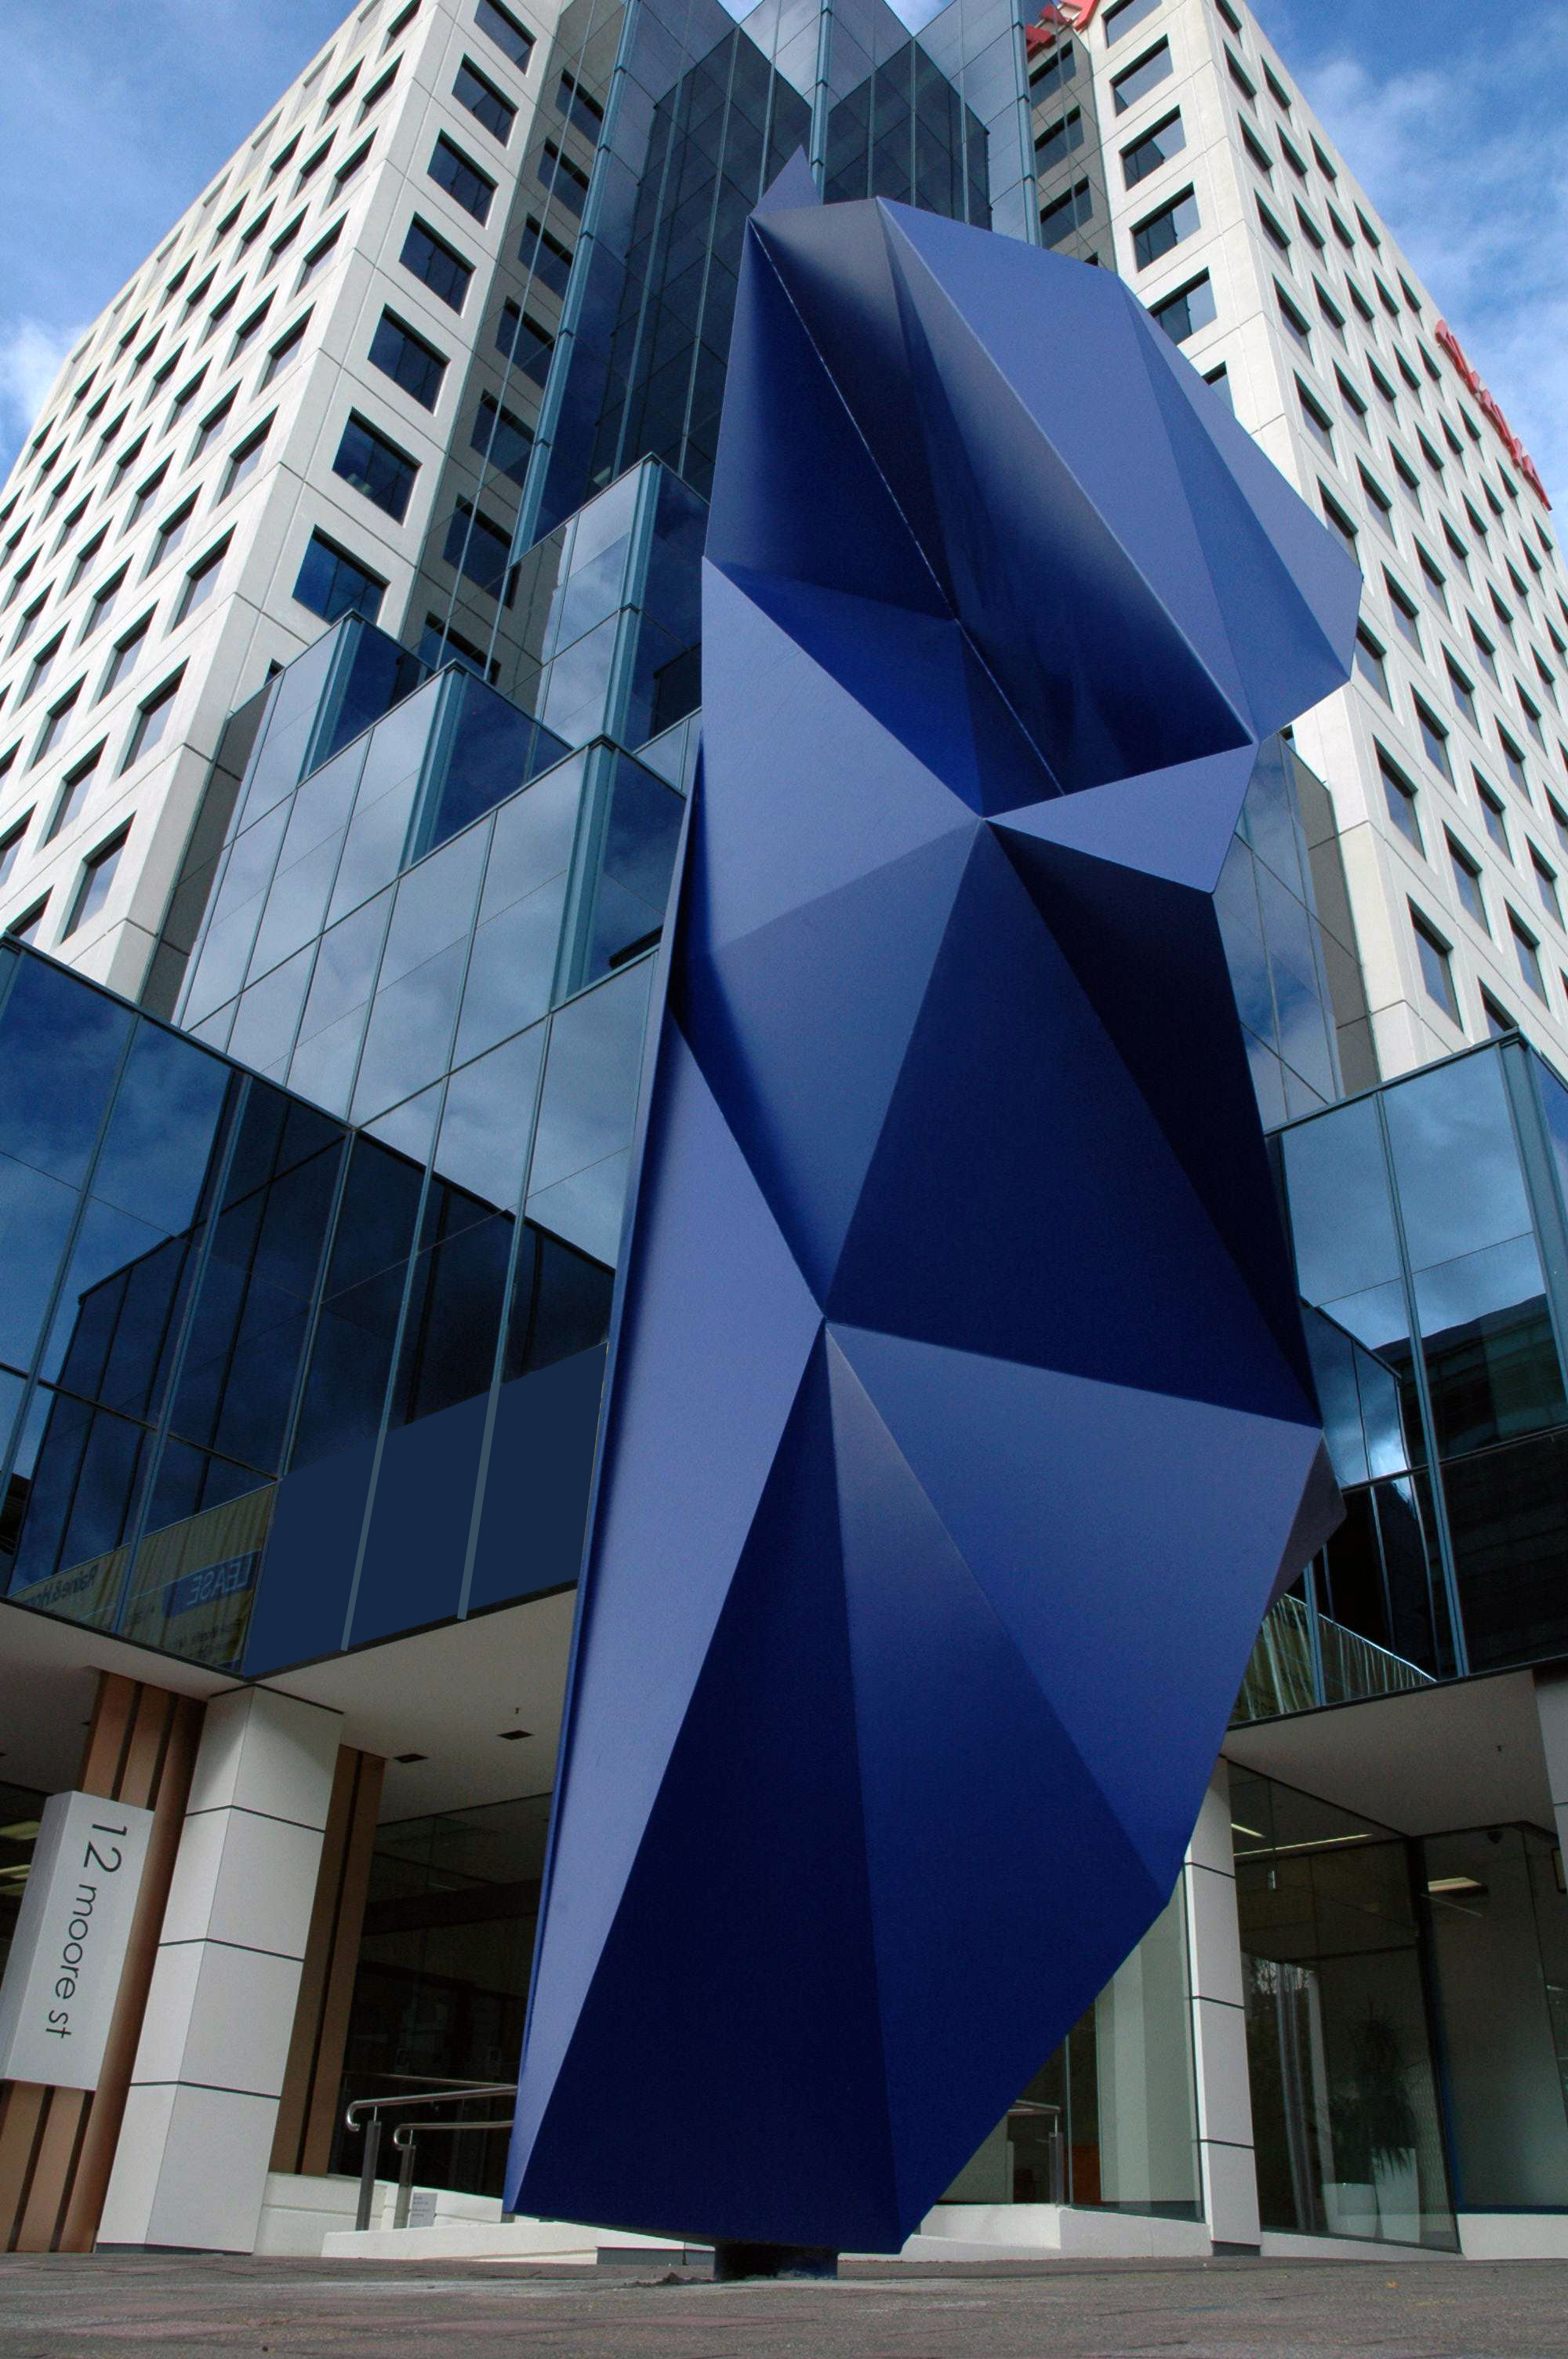 7.-Sky-Shad-Canberra-2011-8-metre-steel-faceted-j-Tarry